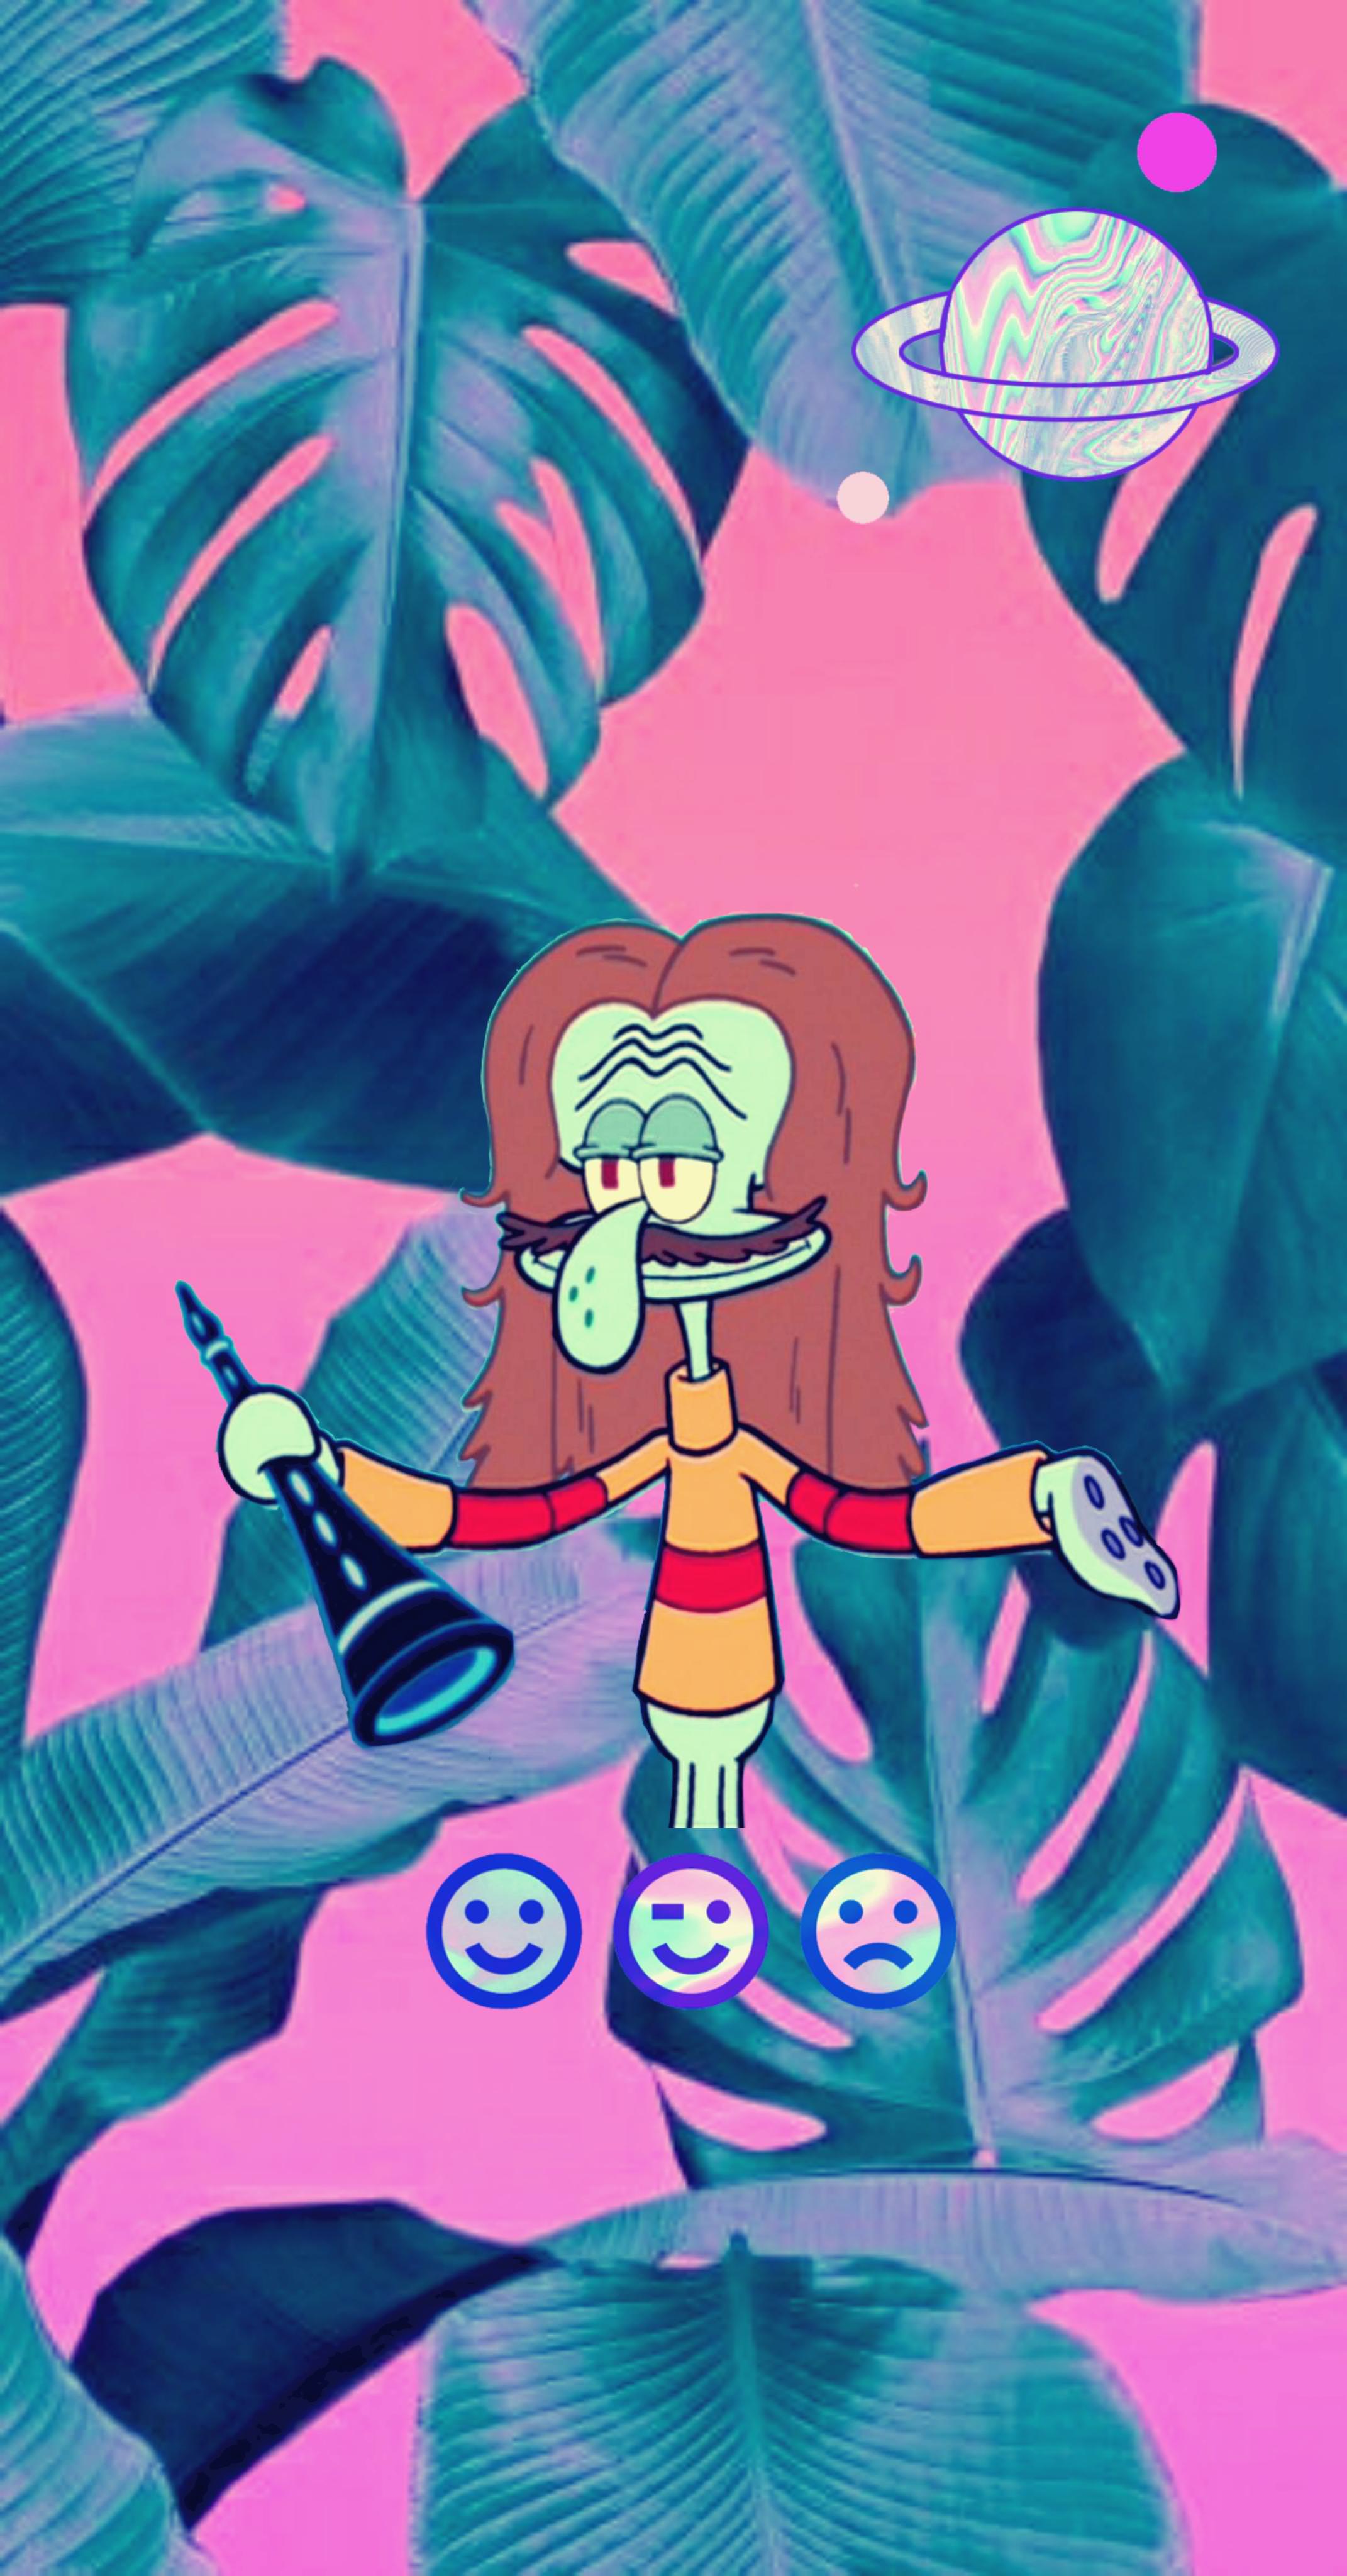 Aesthetic background of Squidward with a pink background and green leaves - Squidward